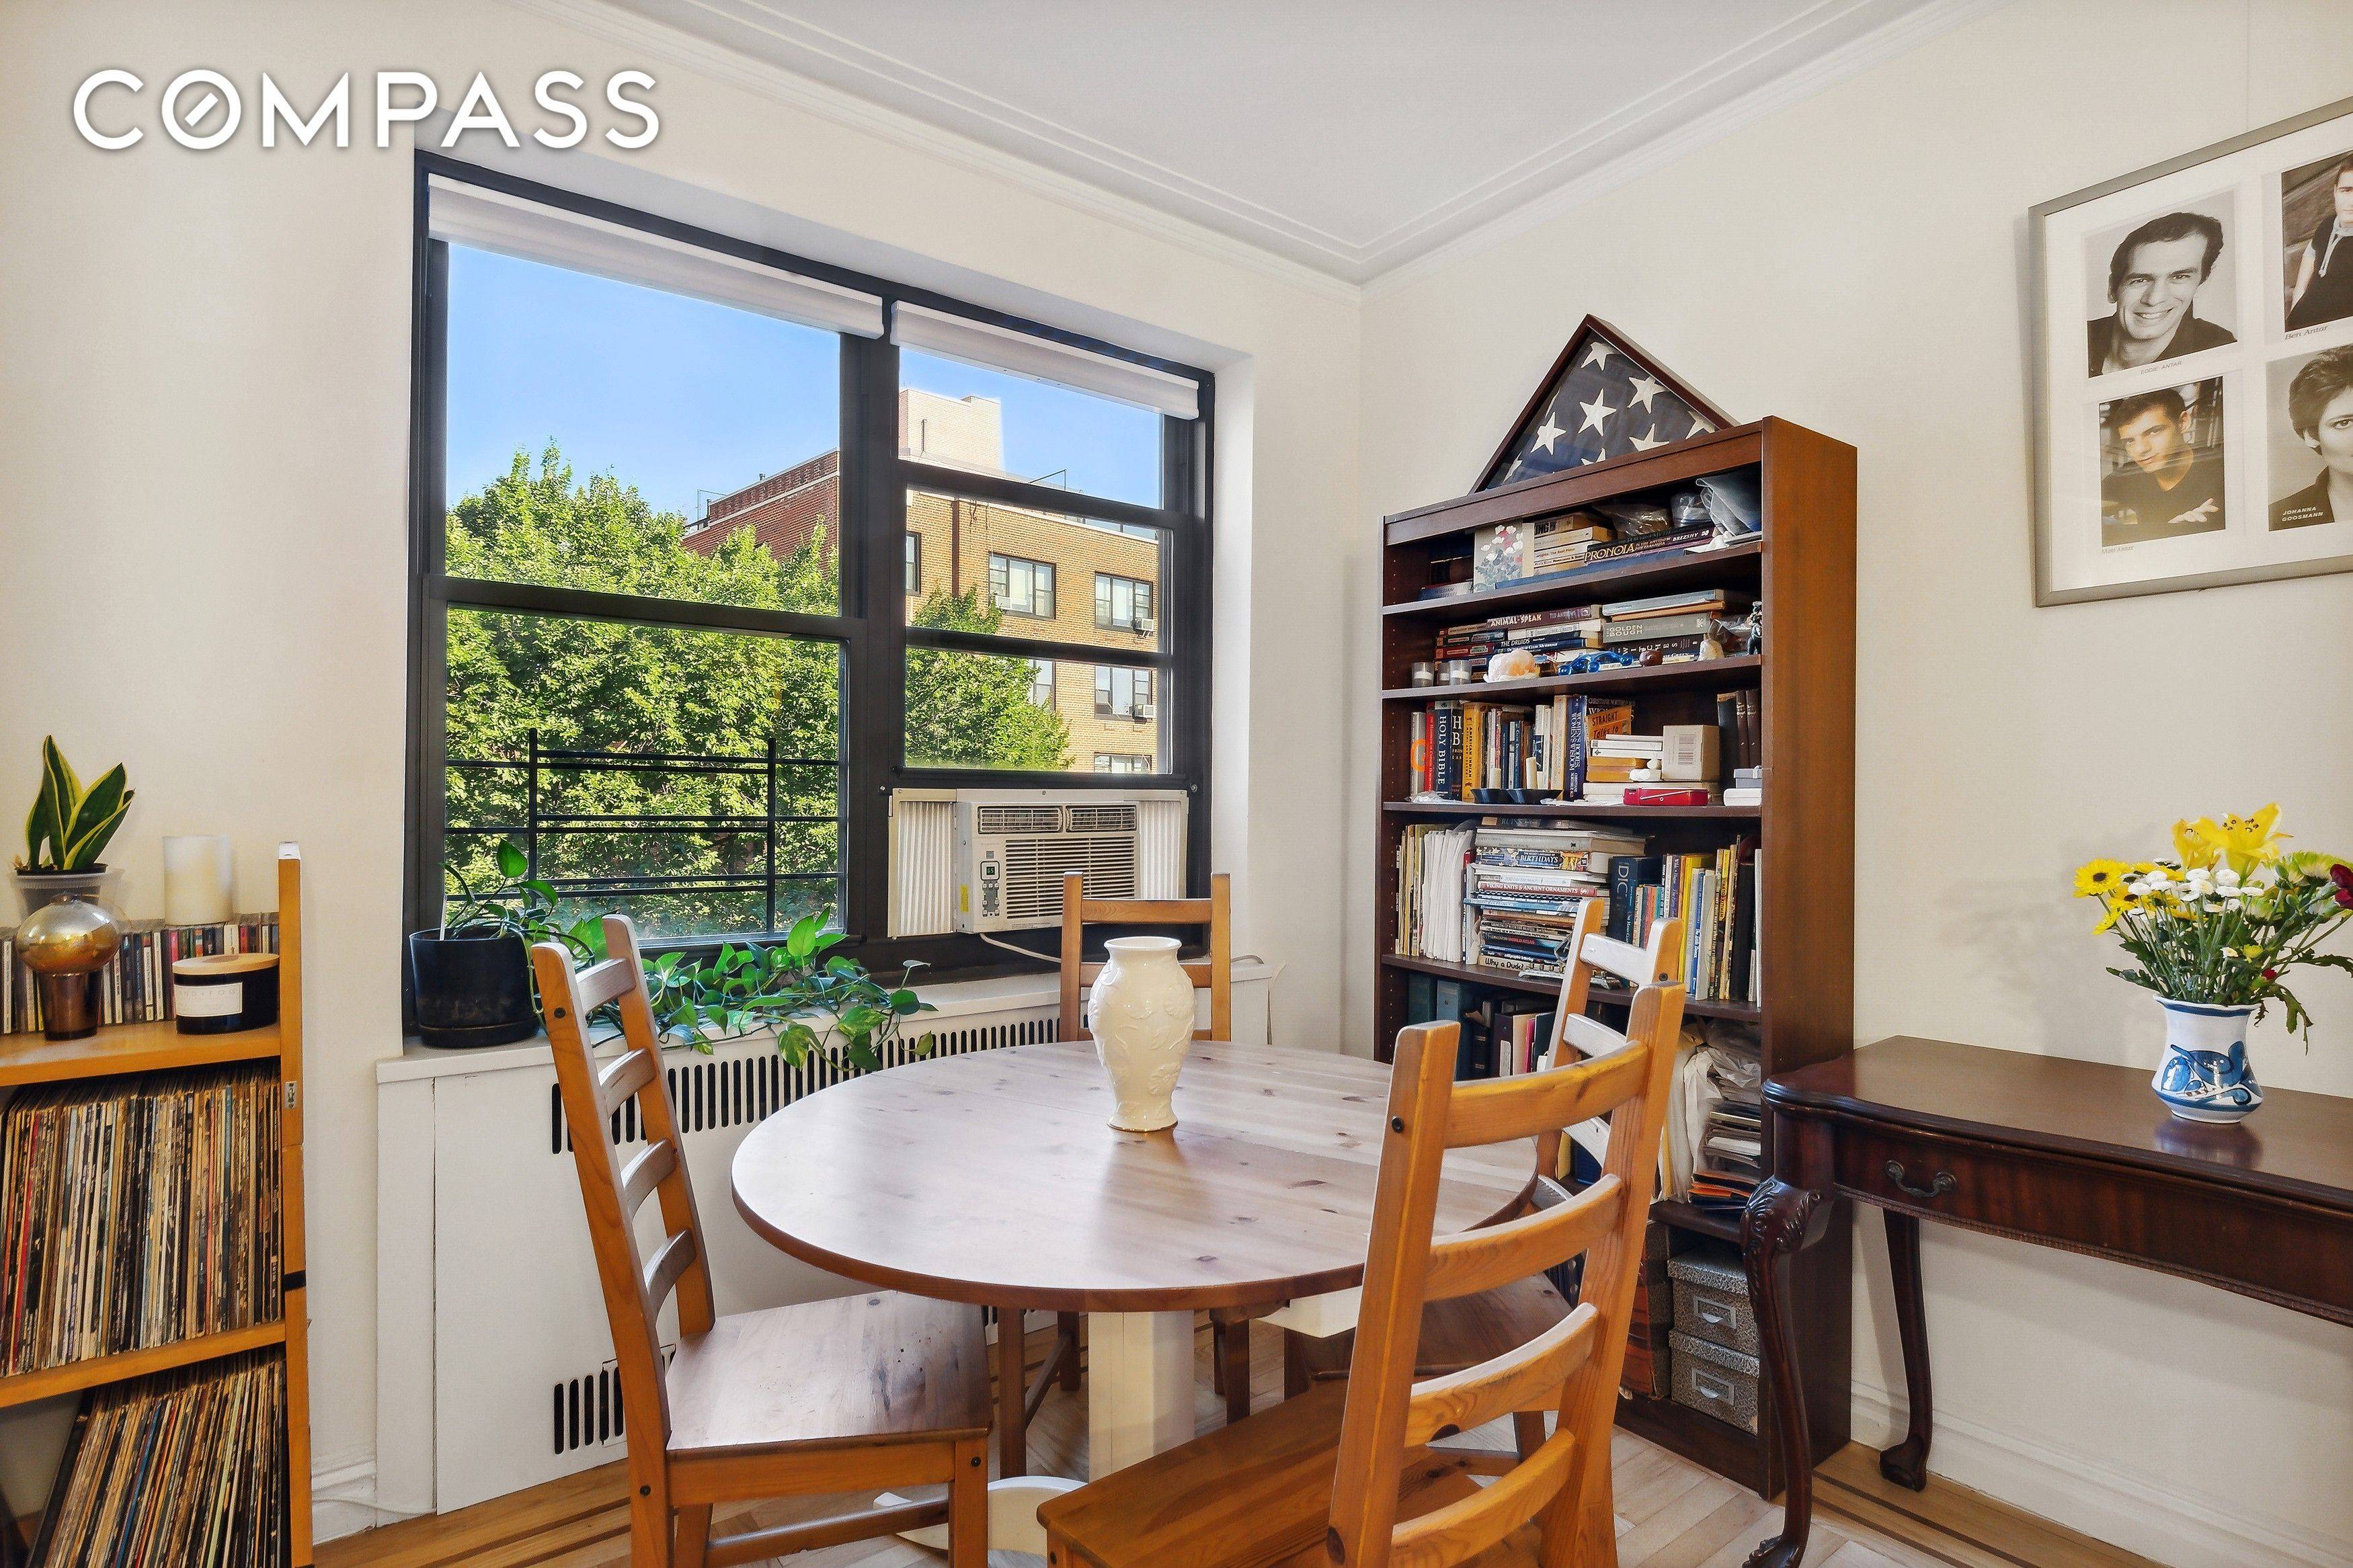 HIGH FLOOR ONE BEDROOM STEAL Glorious light floods this large one bedroom from the east and west creating a warm and happy space to call home.